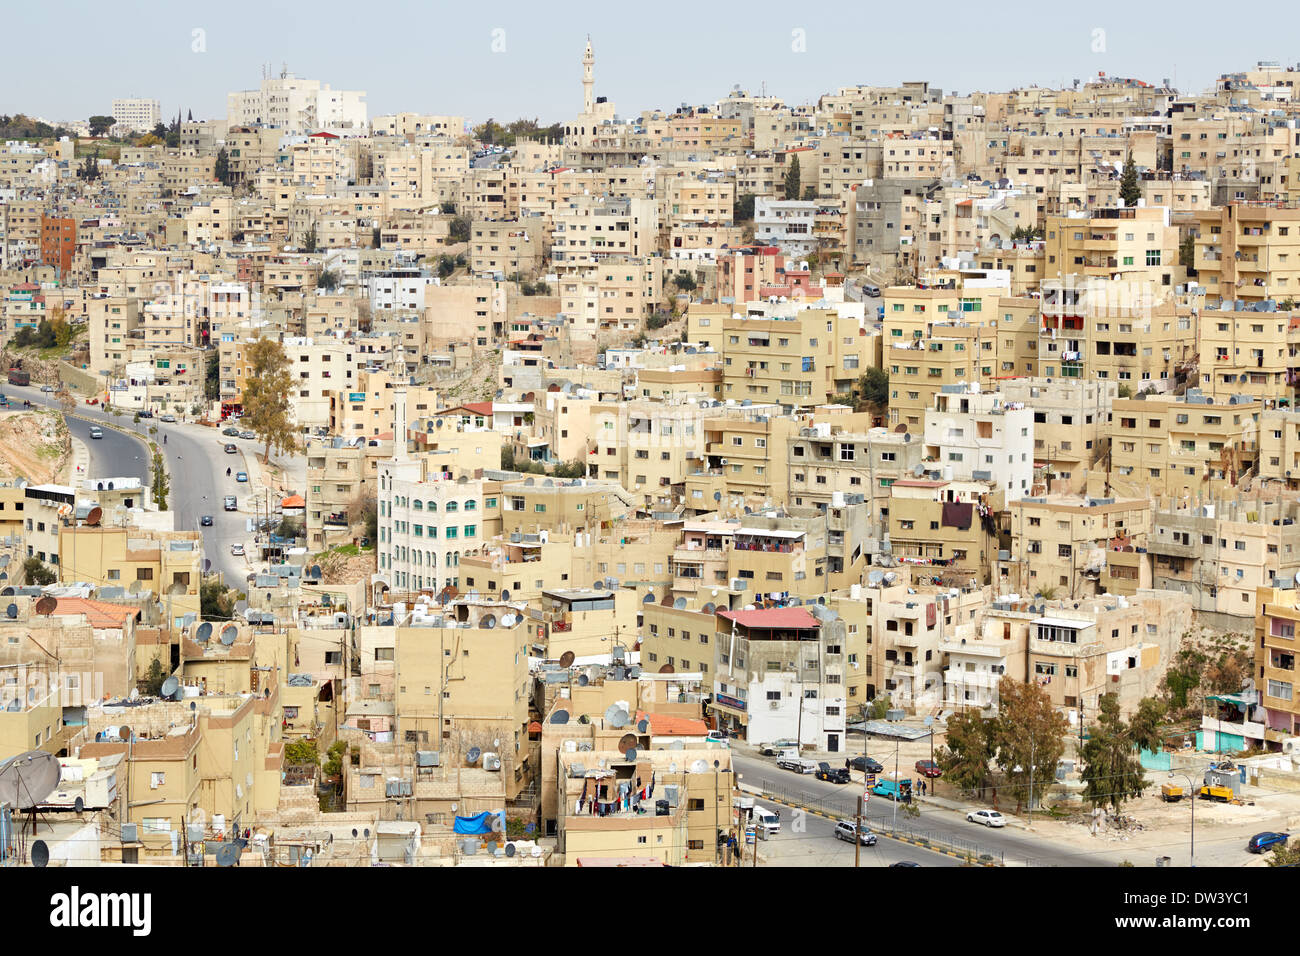 Amman city view of buildings and houses Stock Photo